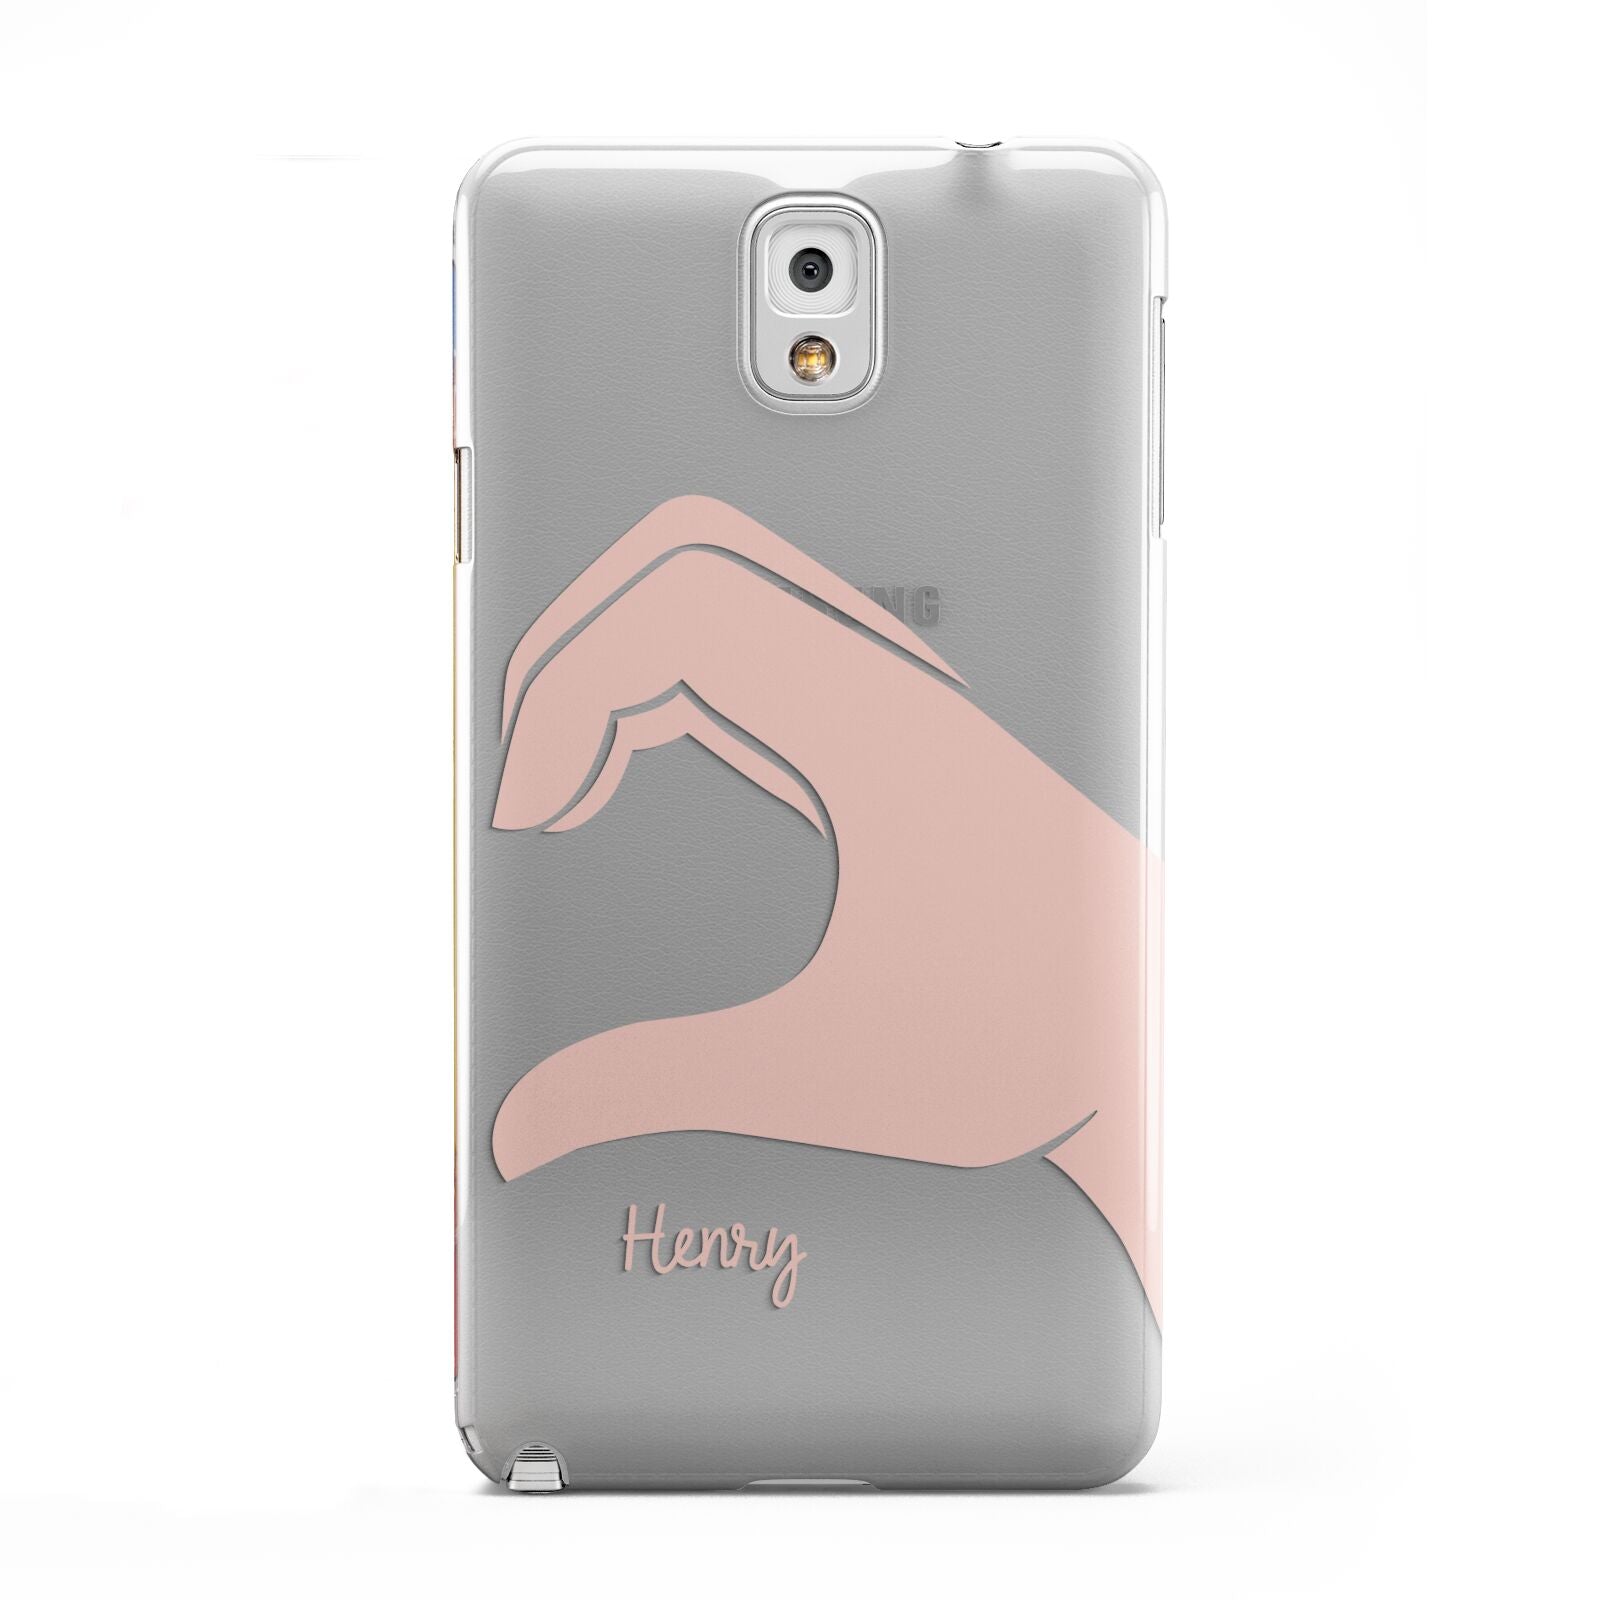 Right Hand in Half Heart with Name Samsung Galaxy Note 3 Case